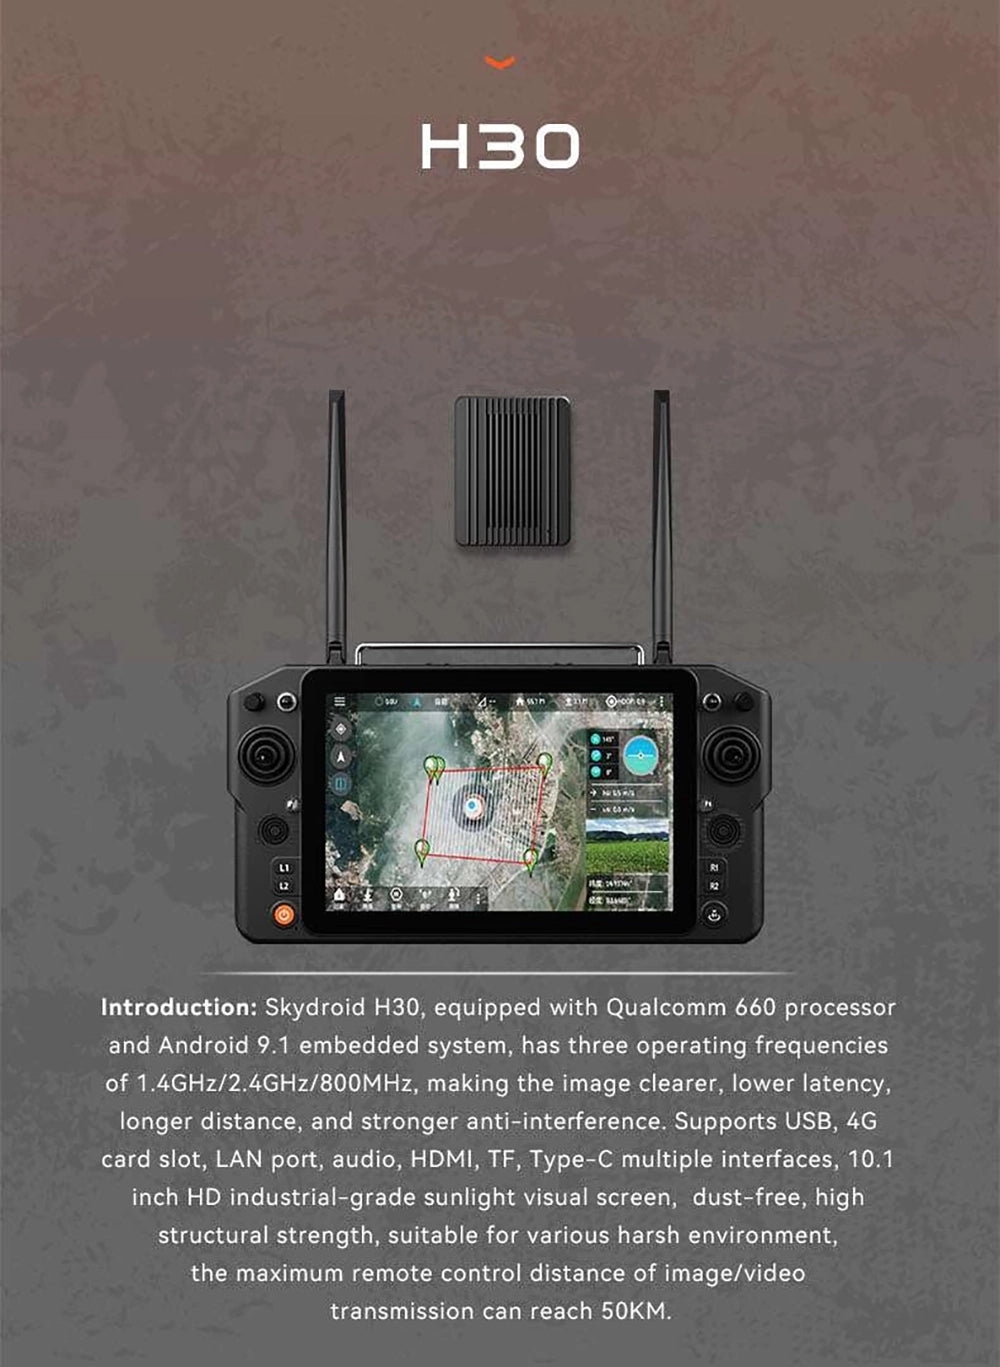 Skydroid H30 has three operating frequencies of 1.4GHz/2 4GHz/8OOMHz